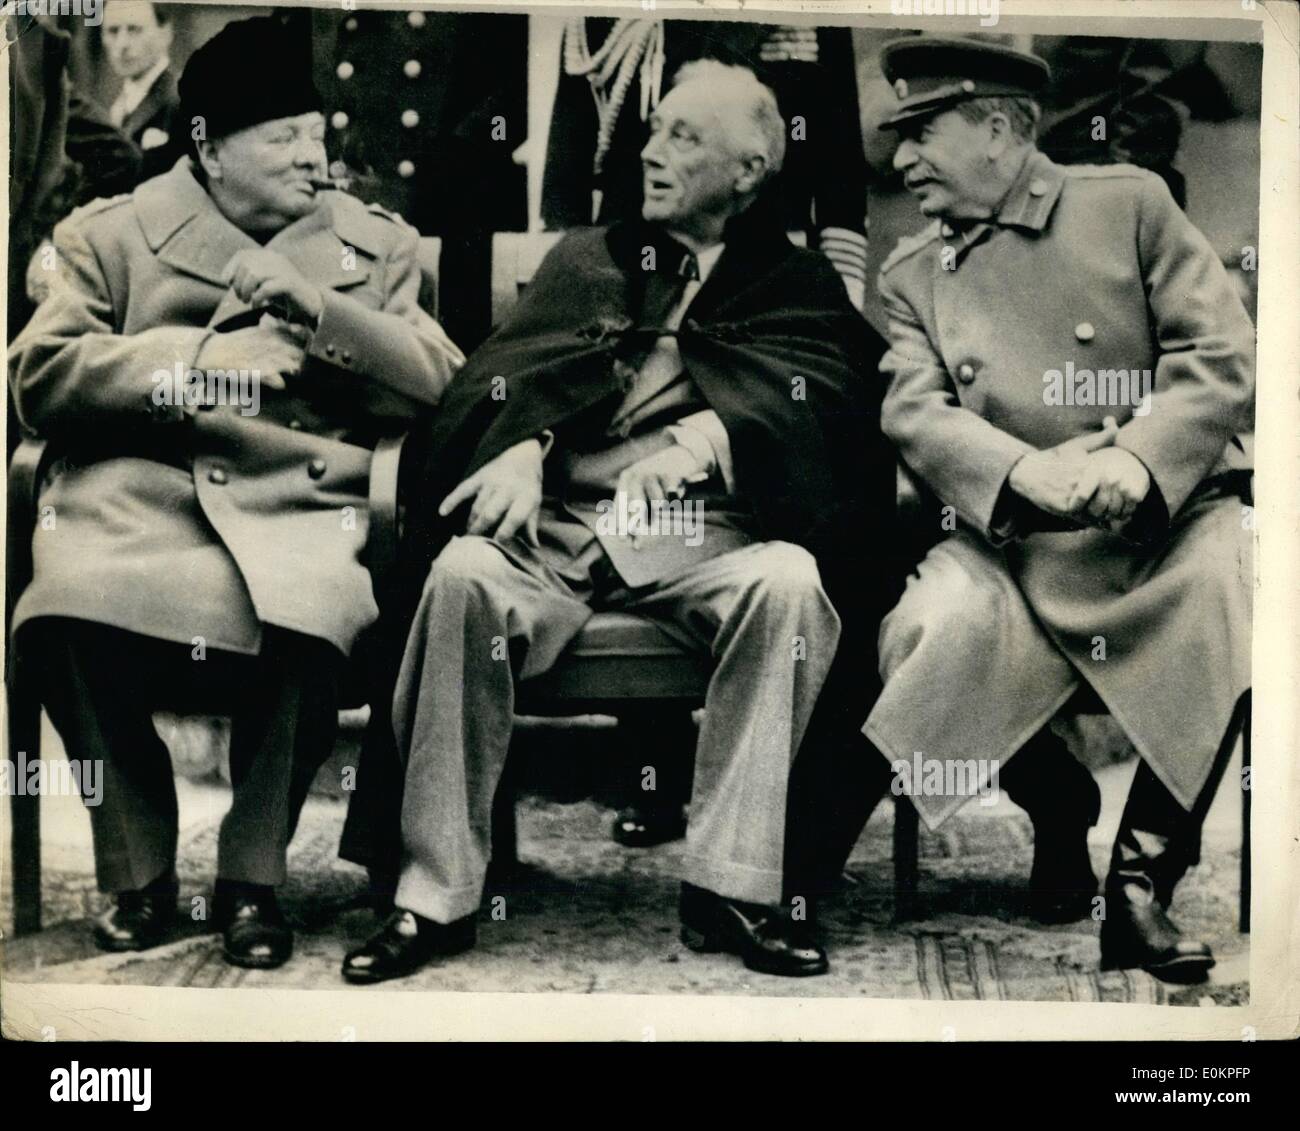 Feb. 02, 1945 - The Big Three Conference: Photographed Taken In The Grounds Of Livadia Palace, Yalta, Where The Three Power Conference Was Held. Photo shows Mr. Churchill, President Roosevelt And Marshal Stalin. Stock Photo